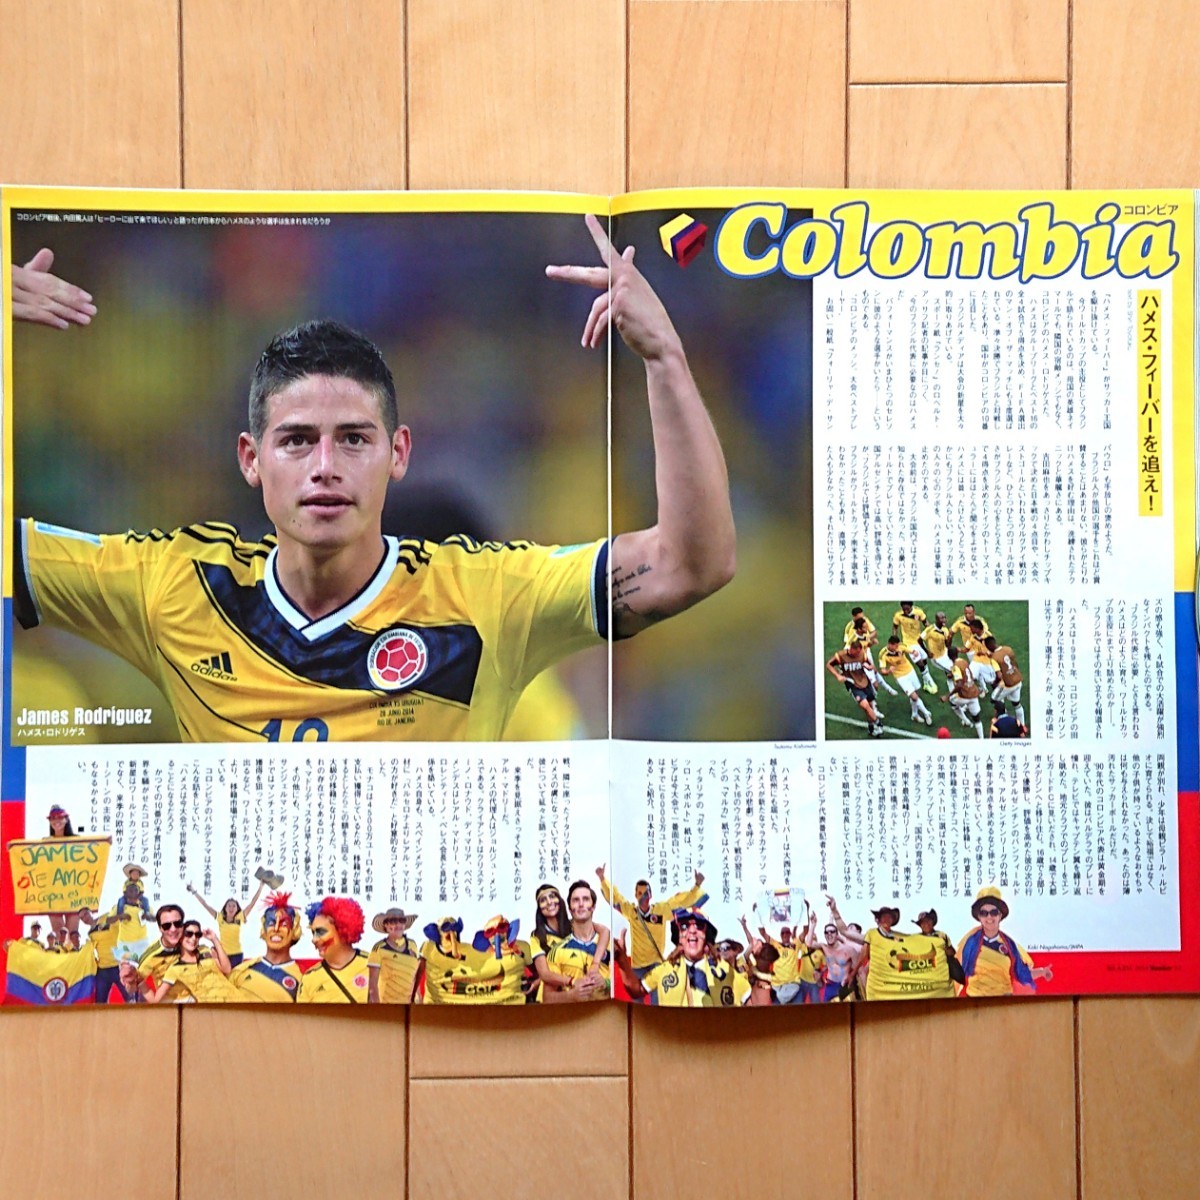 Sports Graphic Number 臨時増刊号 World Cup Brazil 2014 Special Issue ④ 8強激突 Footboal Fantas これが世界のサッカーだ。2014年7/15_画像9